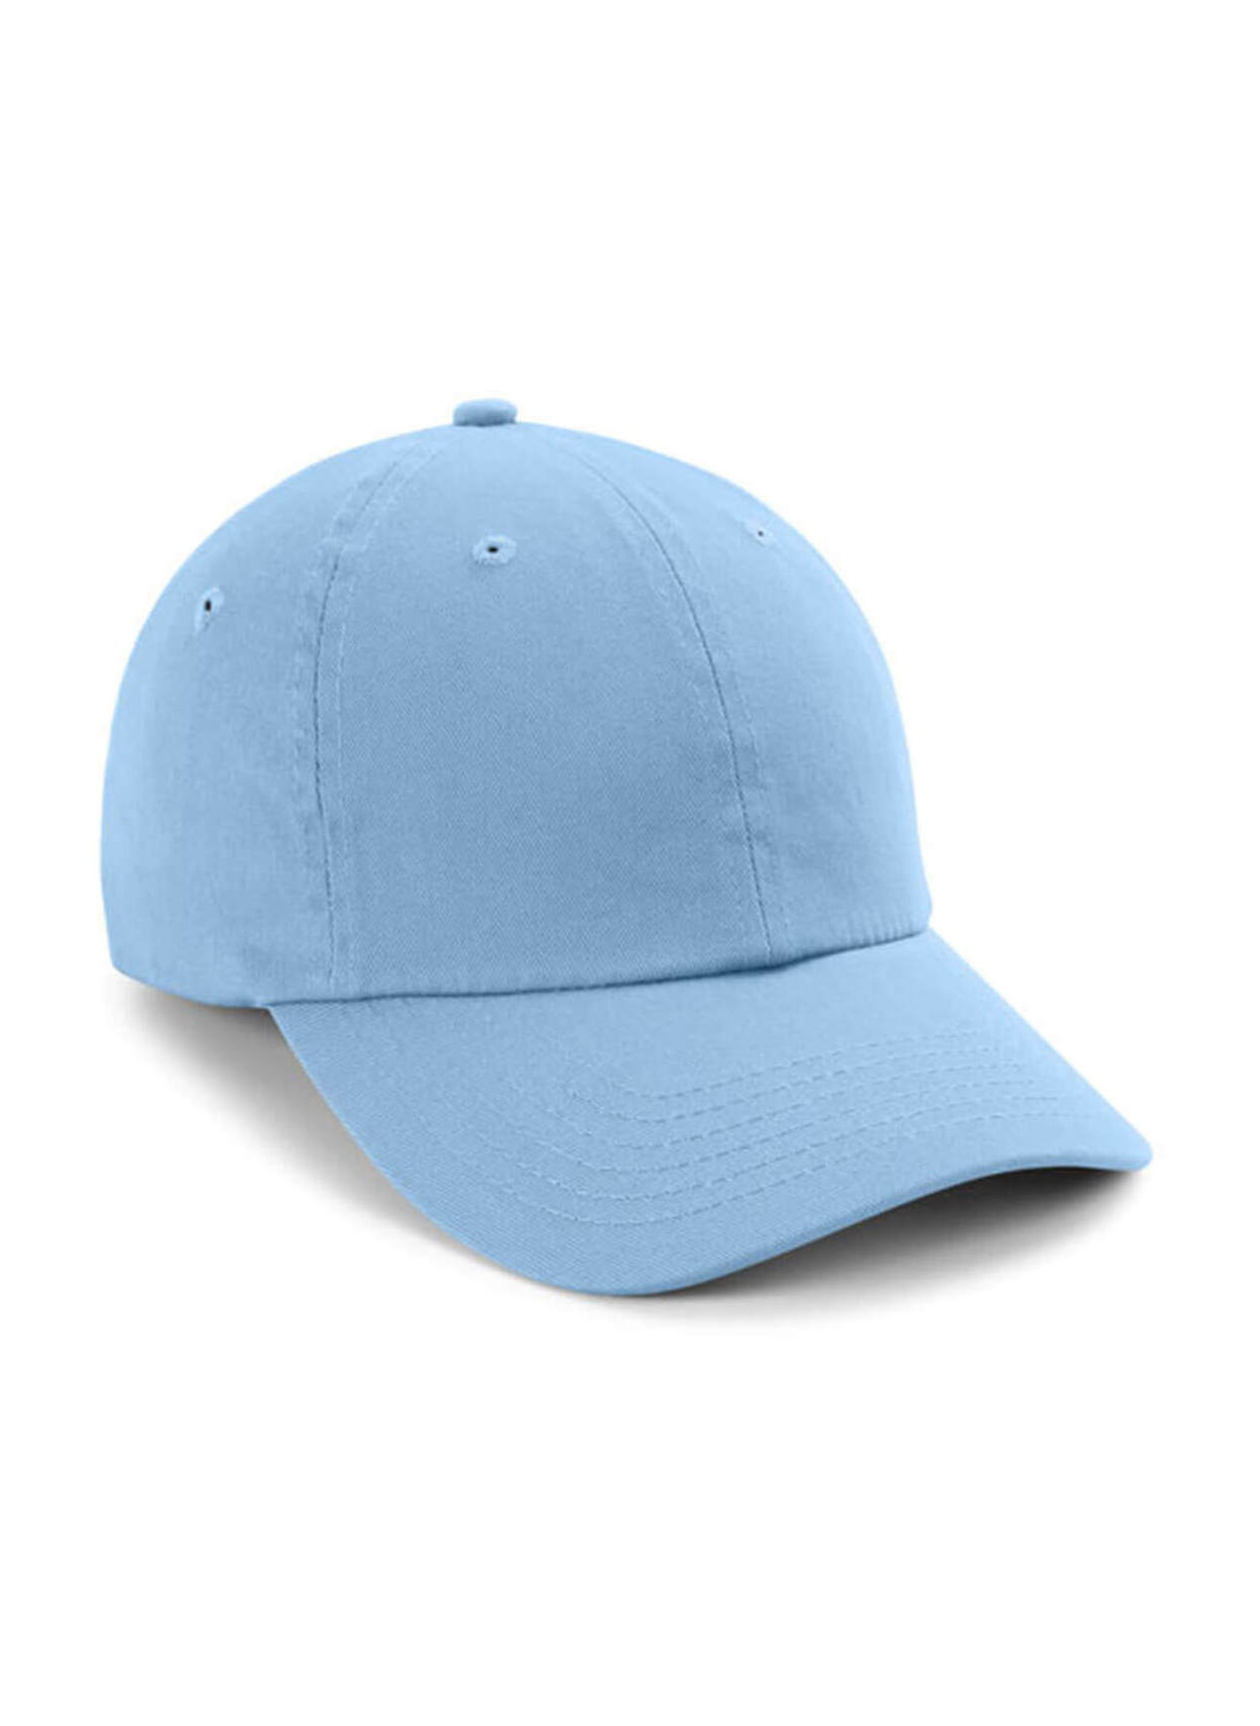 Imperial Light Blue The Original Buckle Hat